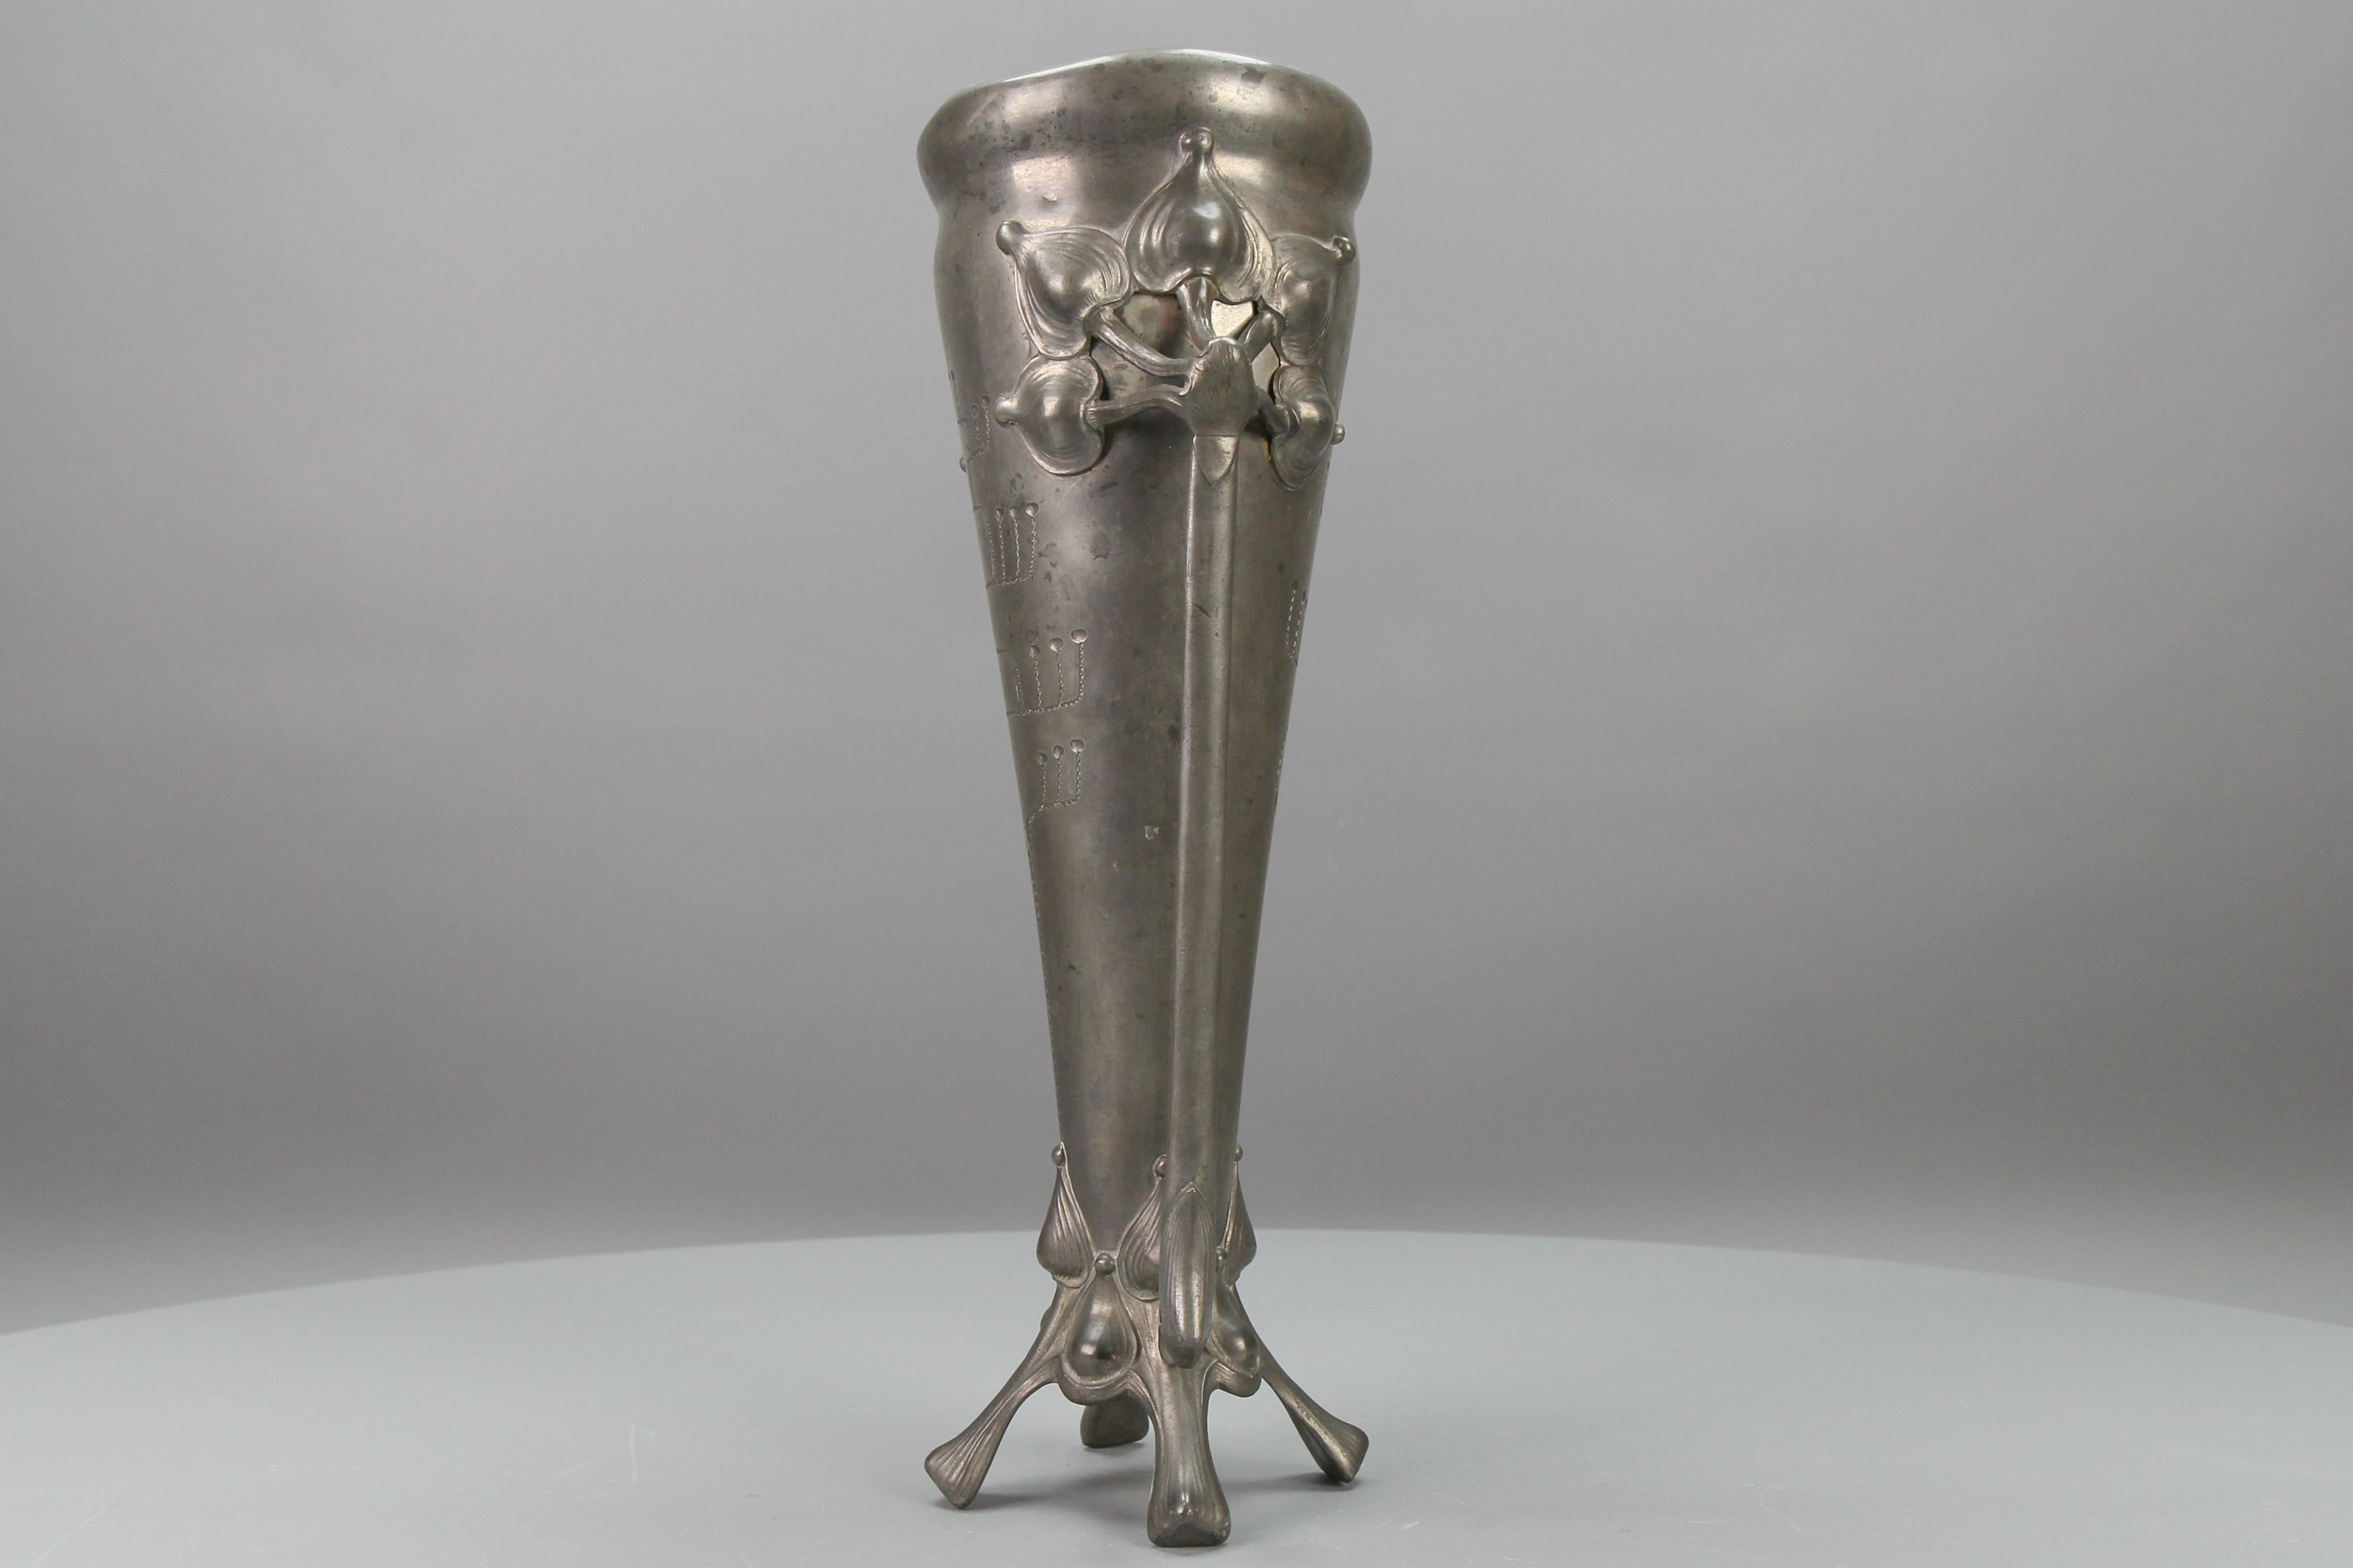 Art Nouveau Pewter Vase with Plant Motifs, Early 20th Century For Sale 5